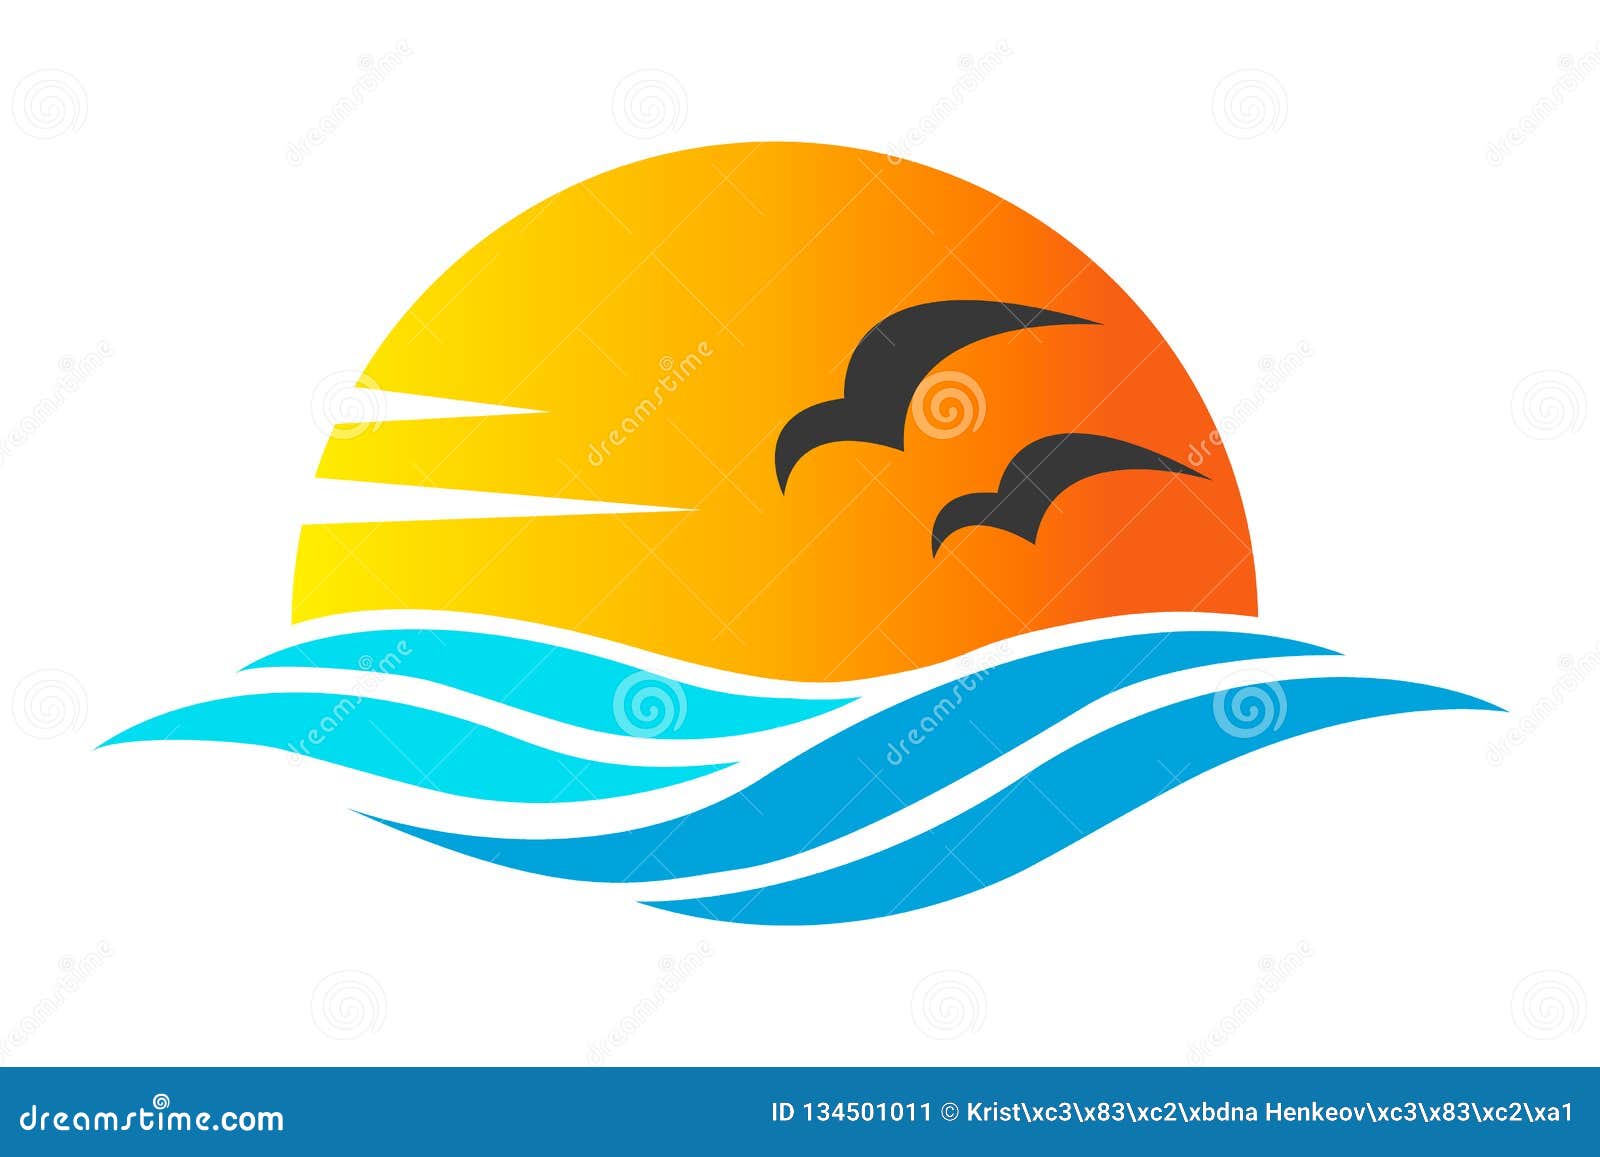 abstract  of ocean icon or logo with sun, sea waves, sunset and seagulls silhoutte in simple flat style. concept